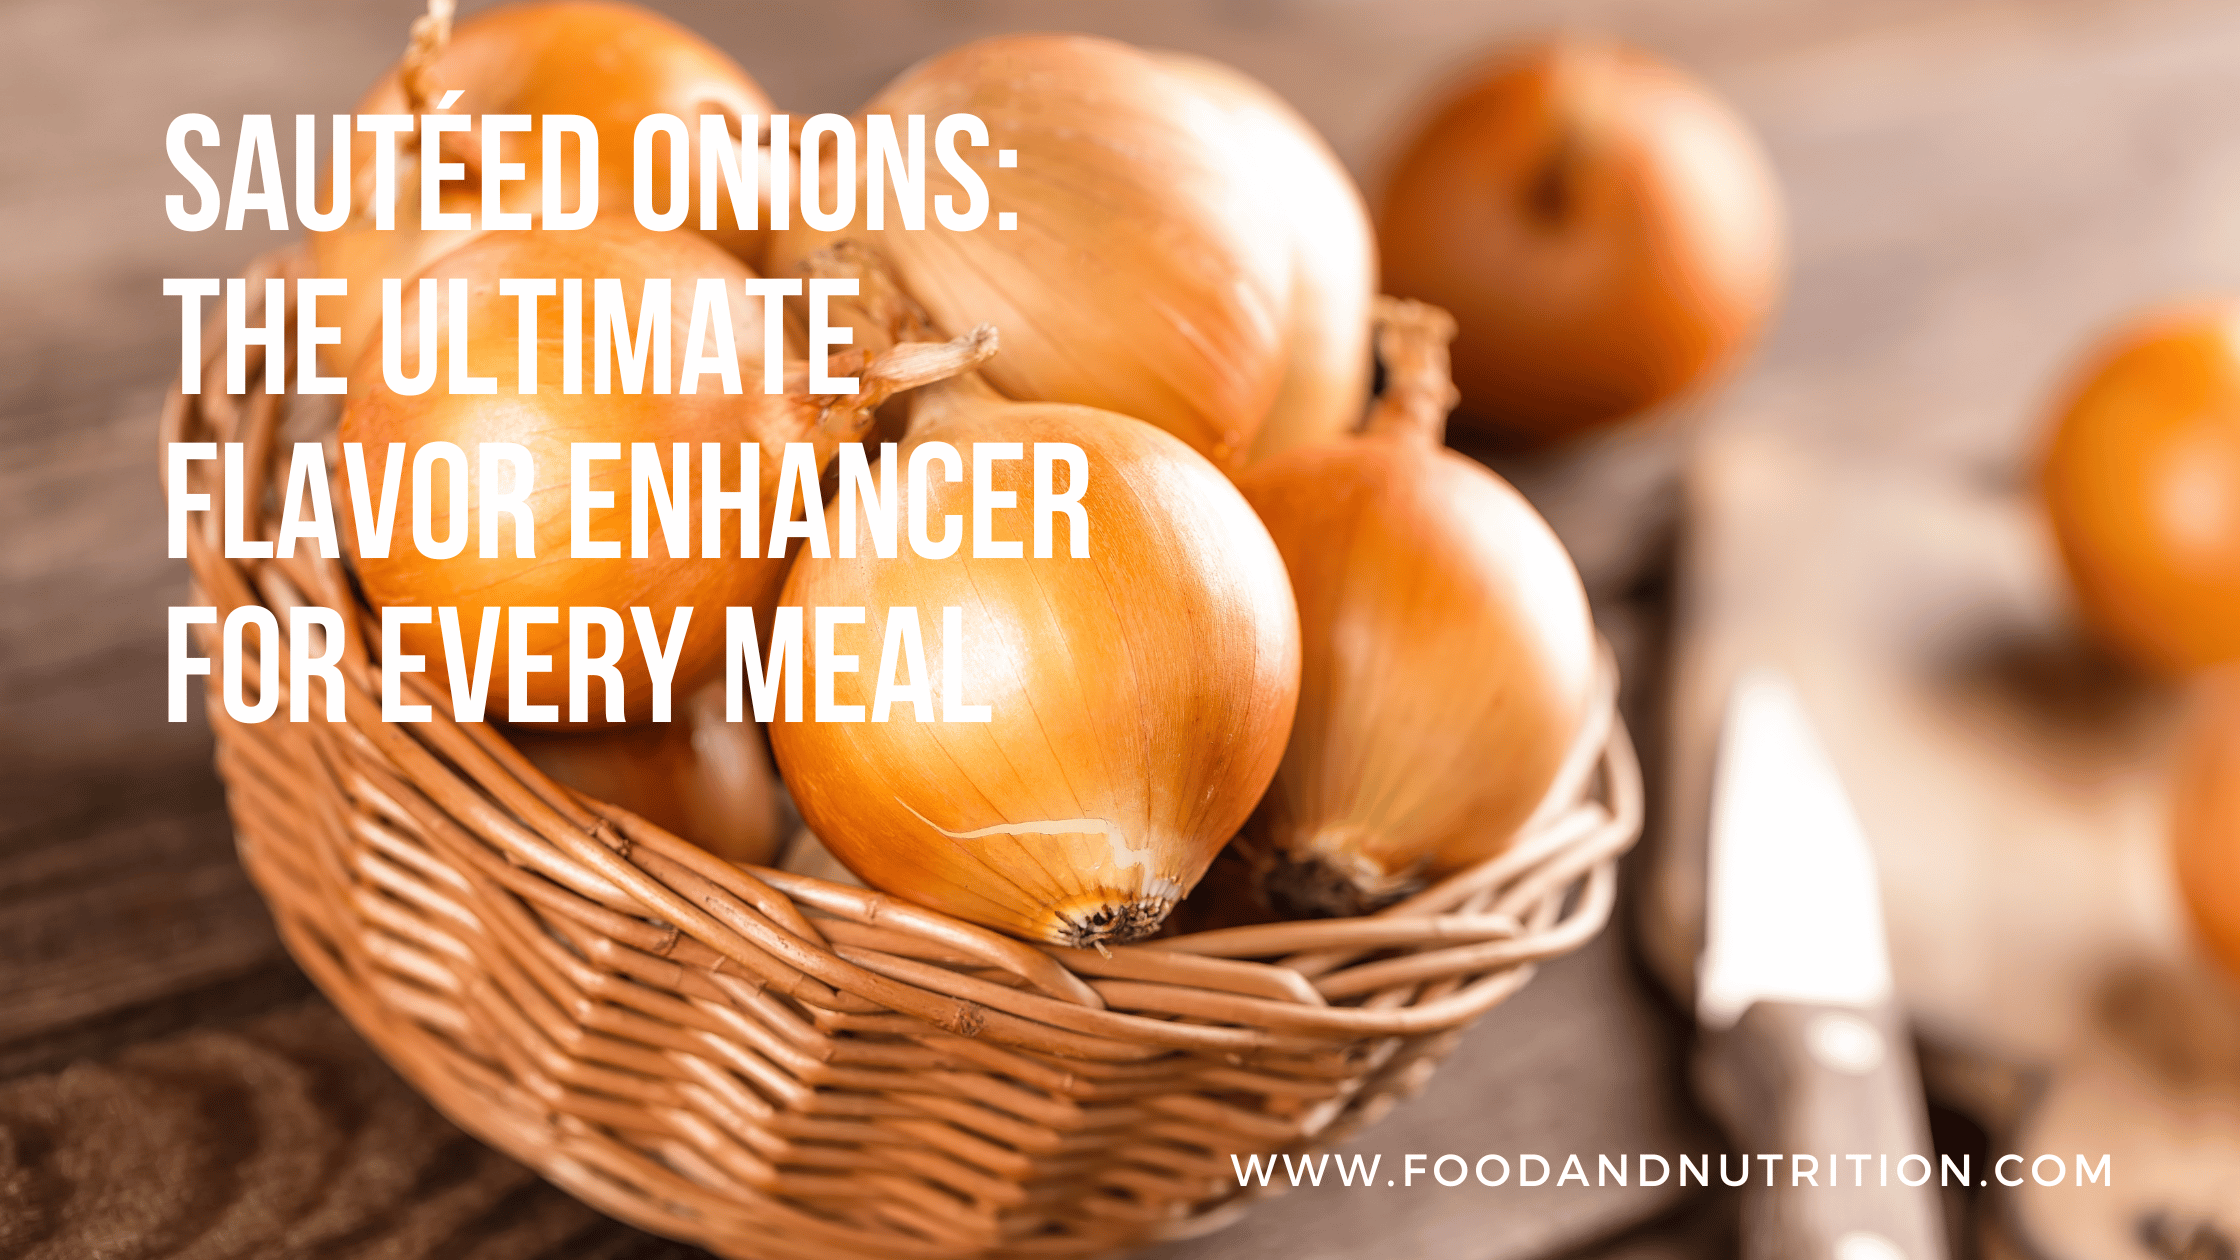 Sautéed Onions: The Ultimate Flavor Enhancer for Every Meal